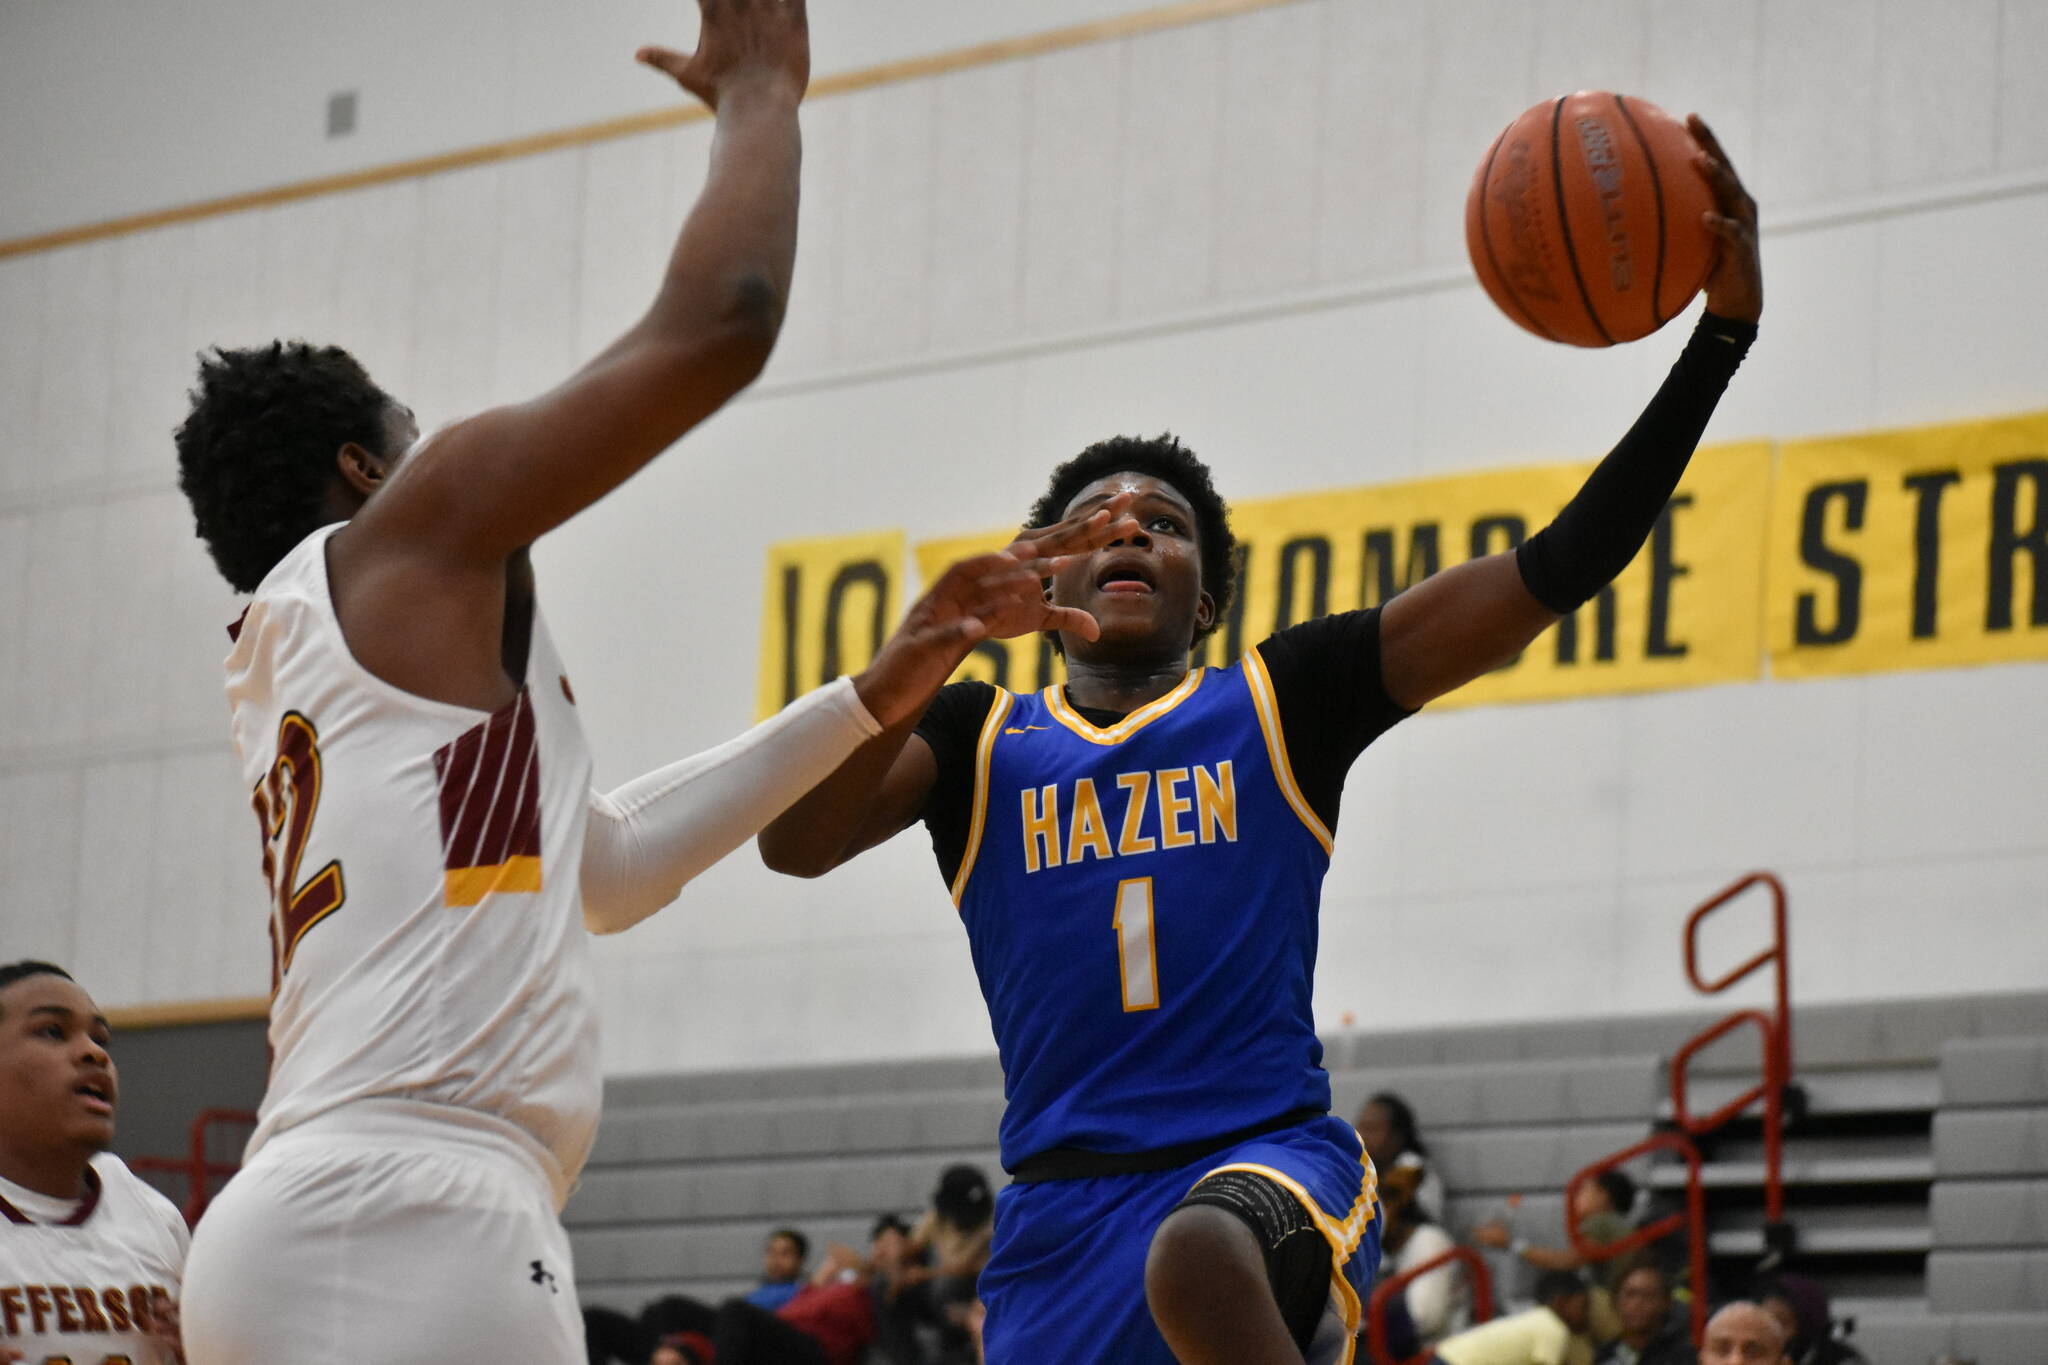 Hazen’s Jaiden Damus goes to the hoop with a defender in his face. (Ben Ray / The Reporter)